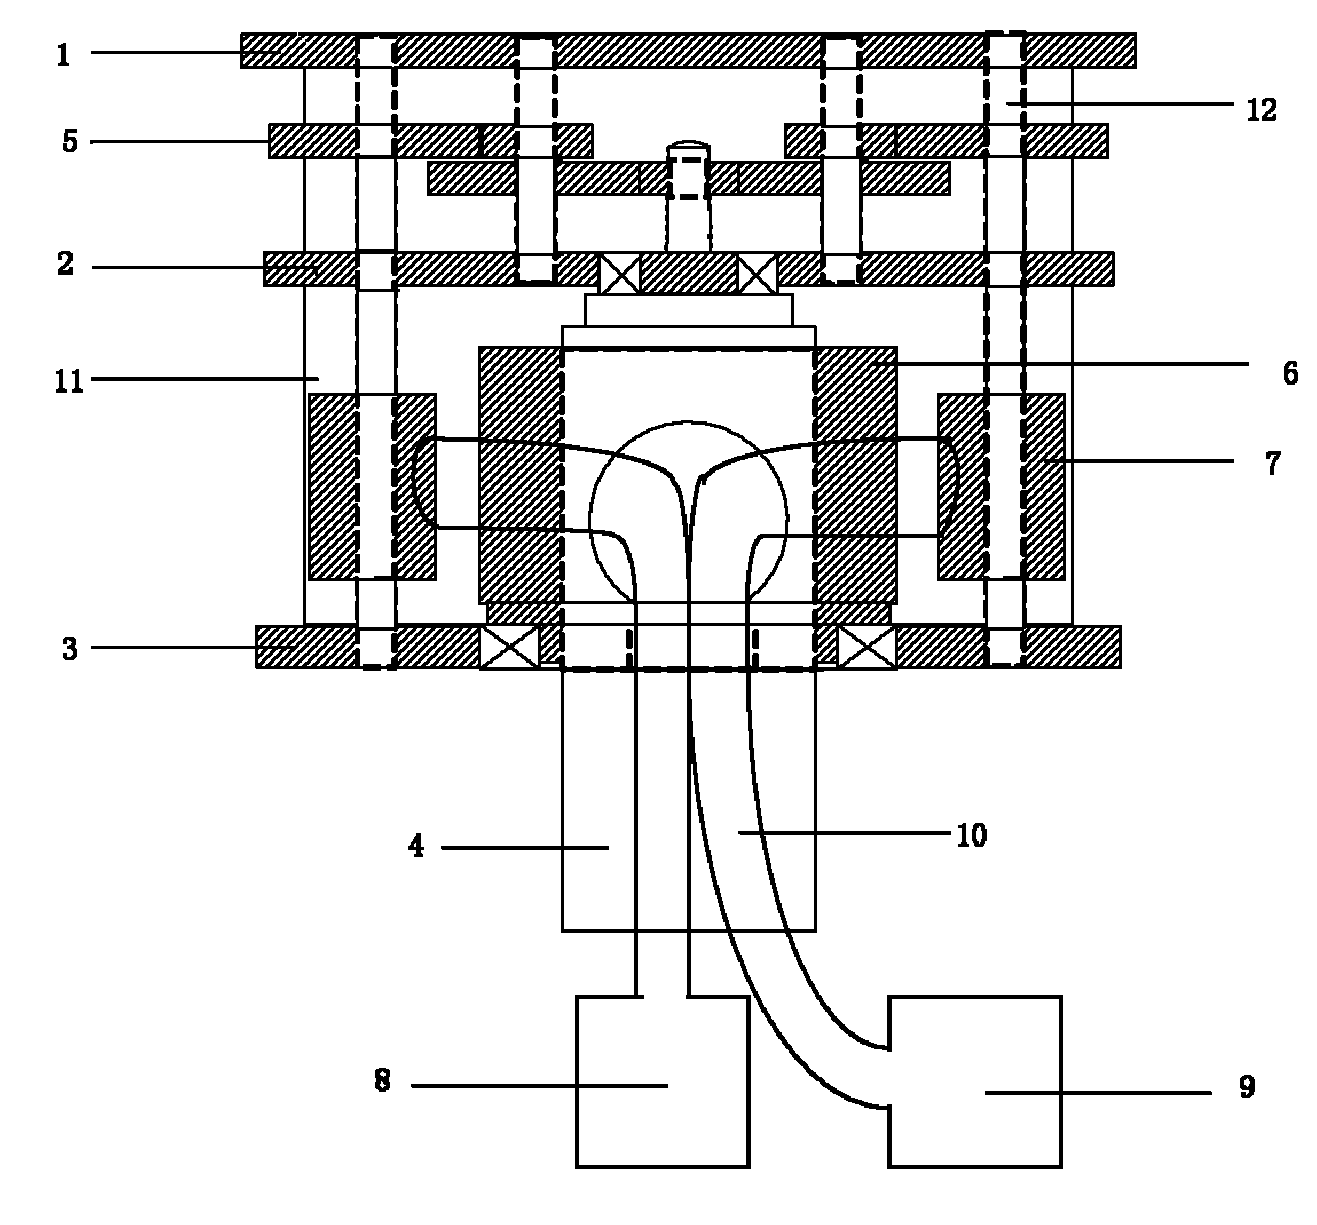 Micro-peristaltic pump for artificial anal sphincter system